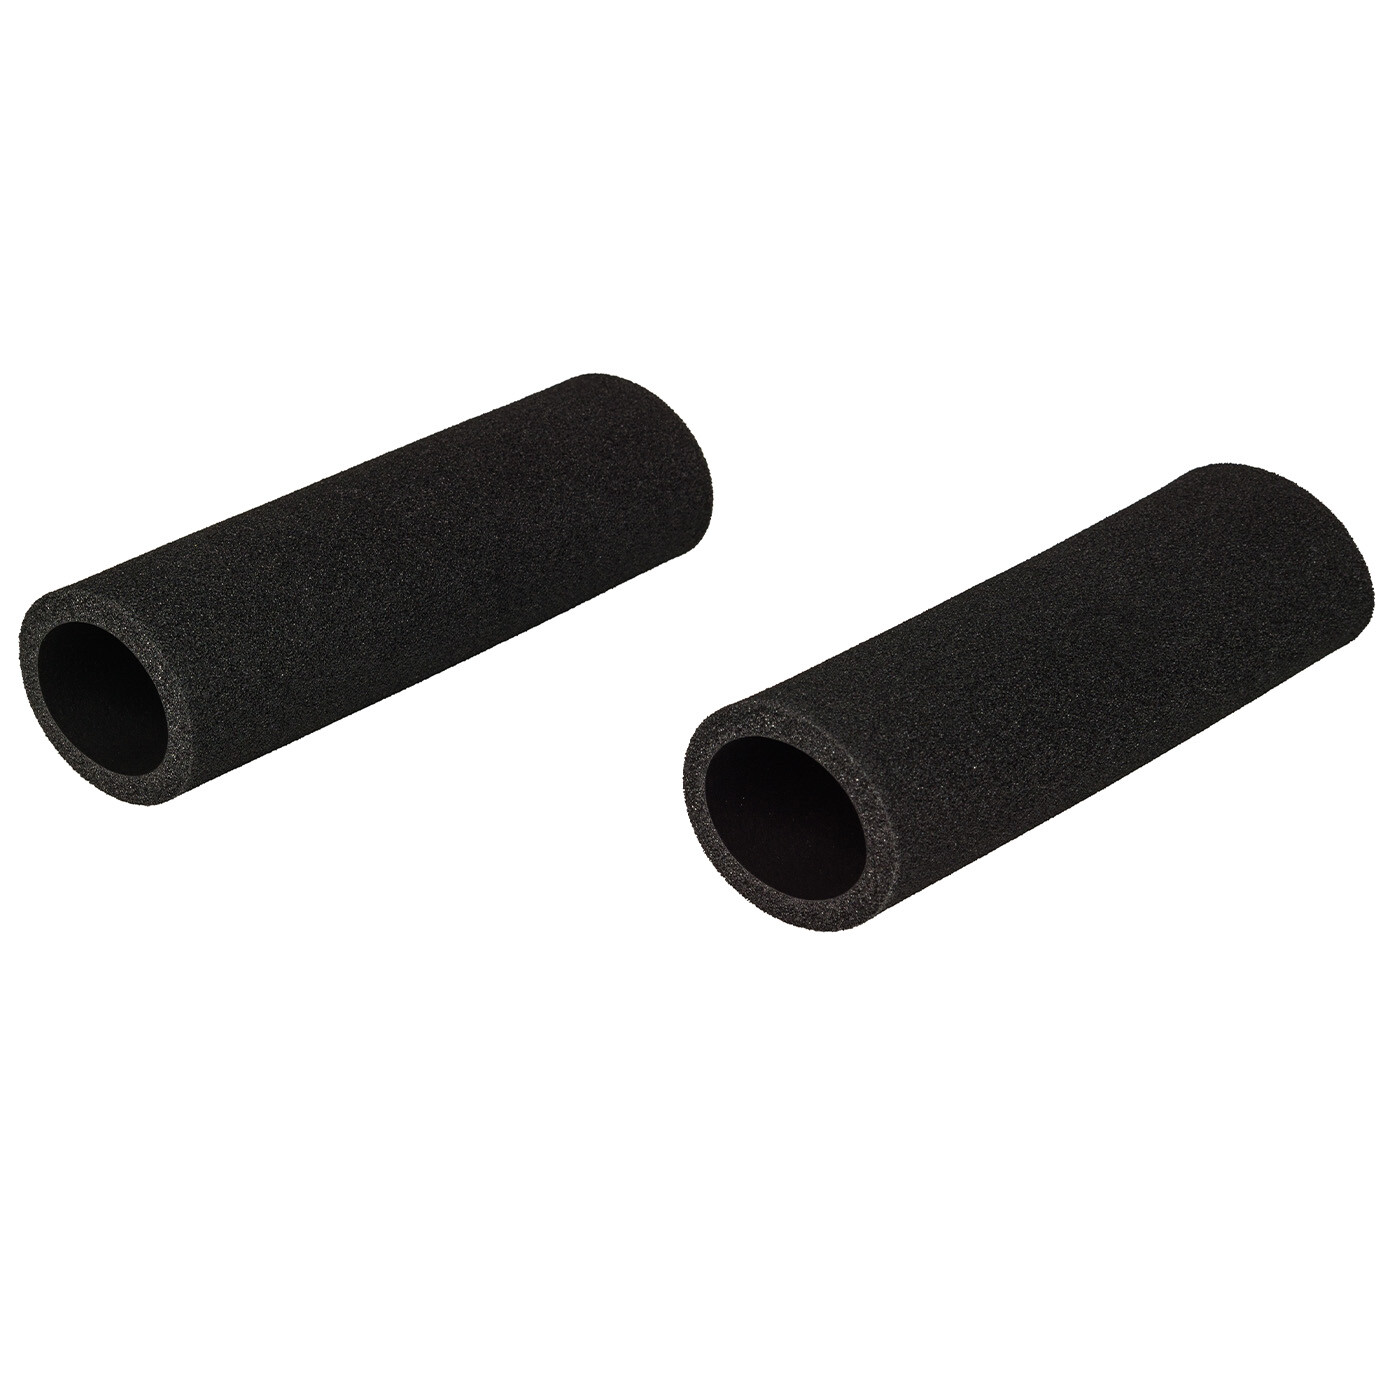 360 Twin™ Foam Grip Replacement Sleeves